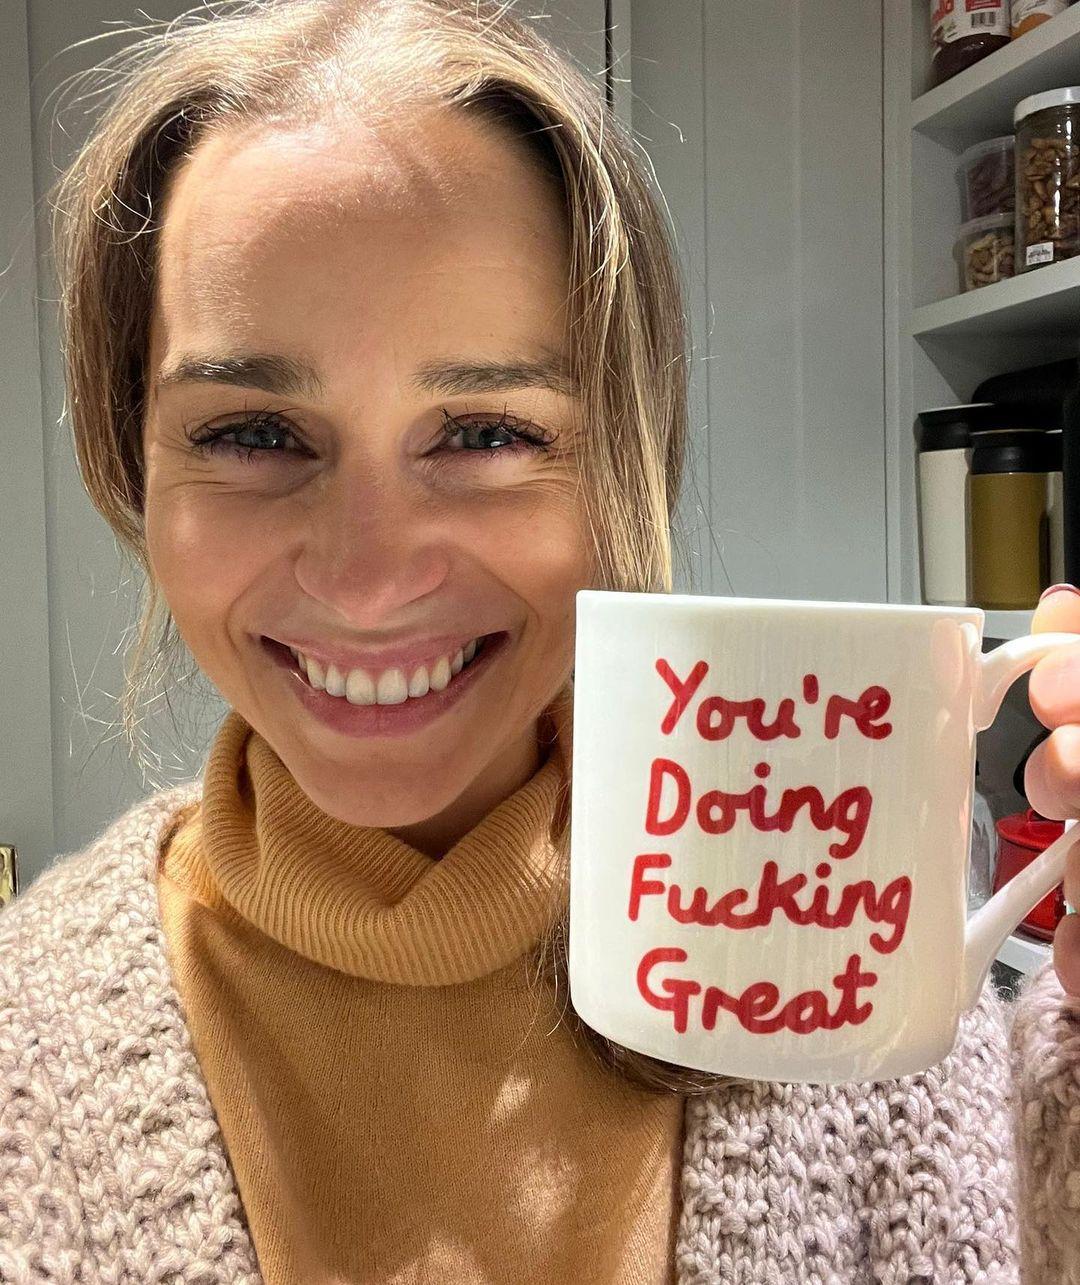 Emilia Clarke has an important message for her fans